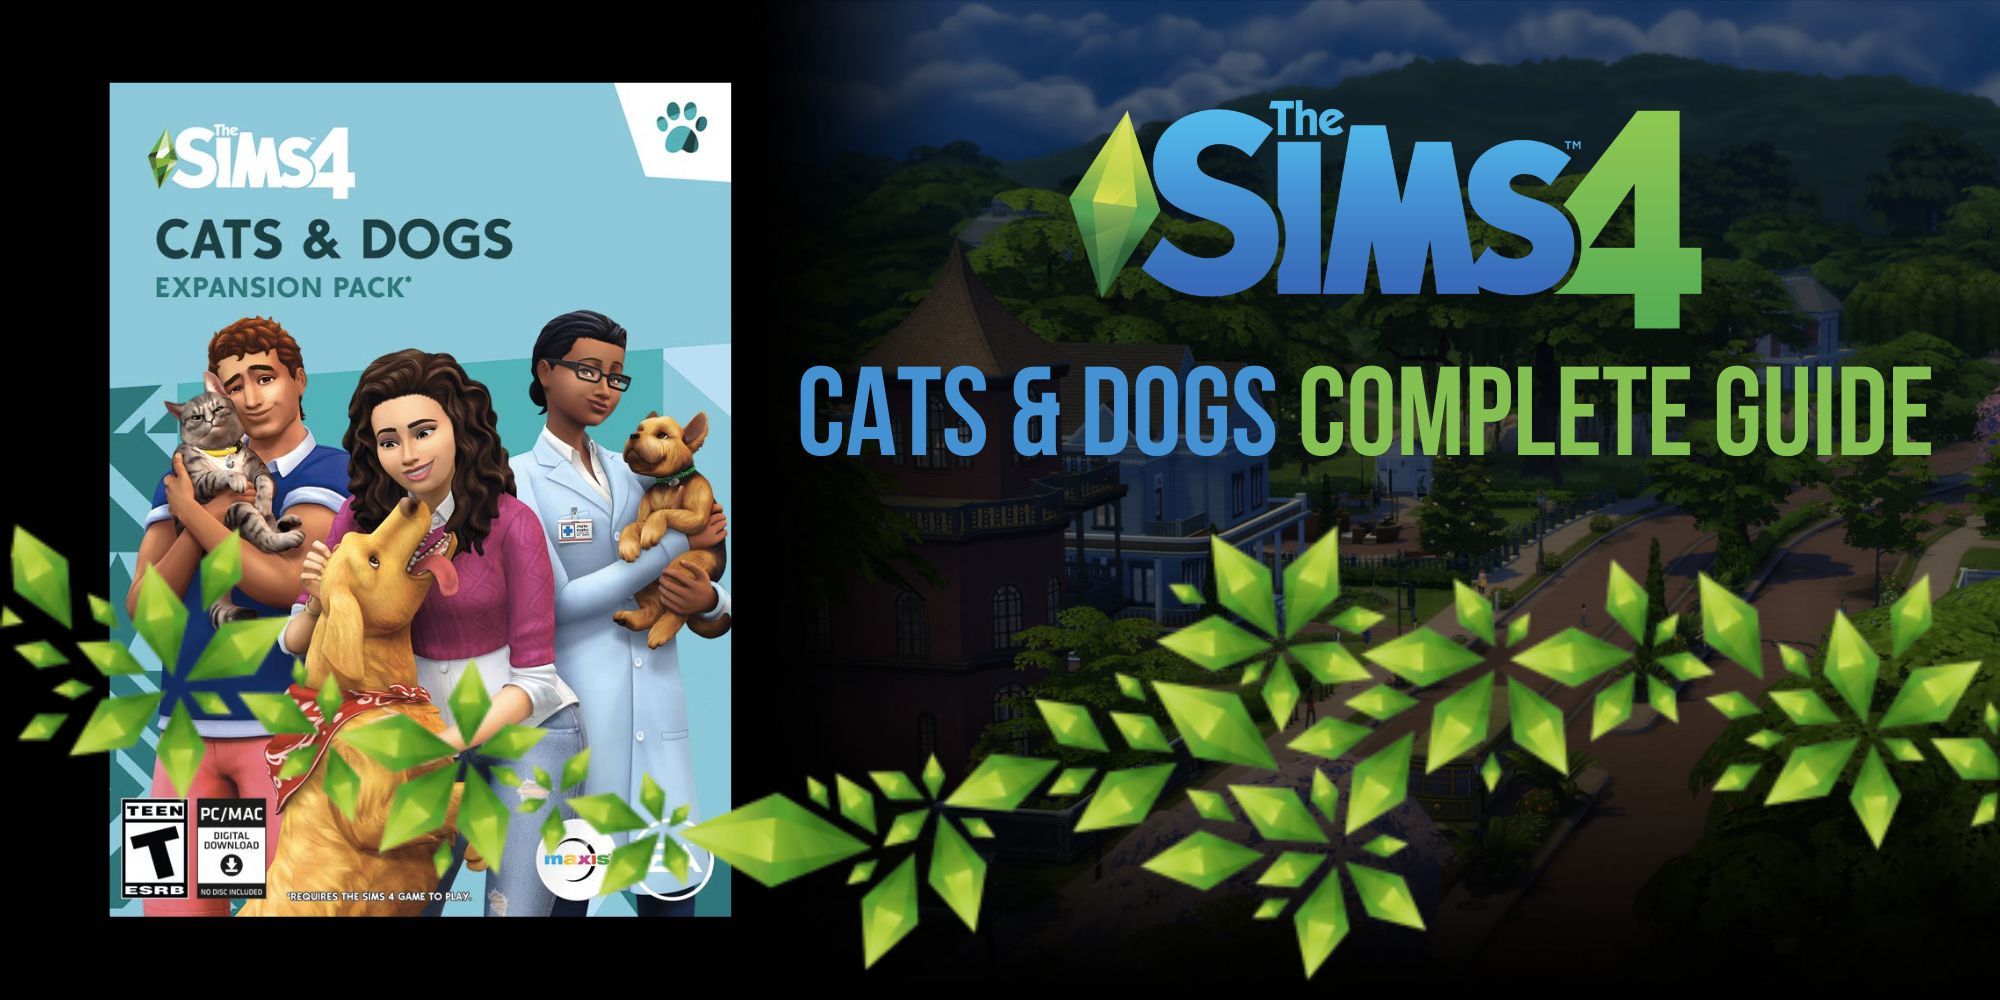 The Sims 4, PS4, Xbox One, PC, Cheats, Mods, Cats, Dogs, Download